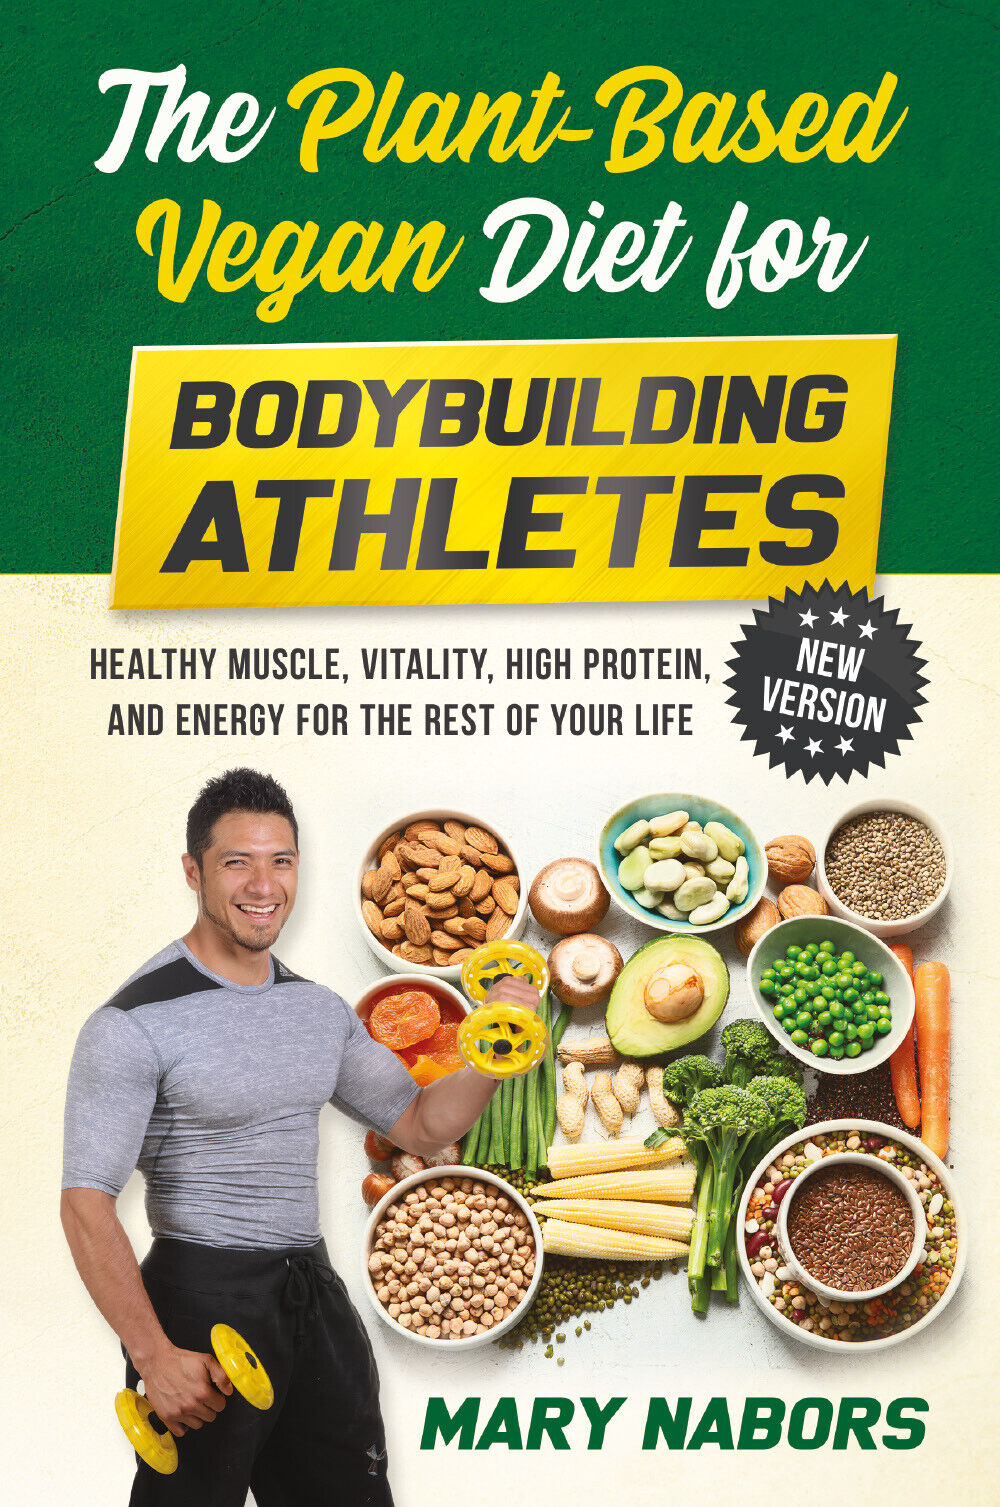 The Plant-Based Vegan Diet for Bodybuilding Athletes (NEW VERSION) di Mary Nabor libro usato